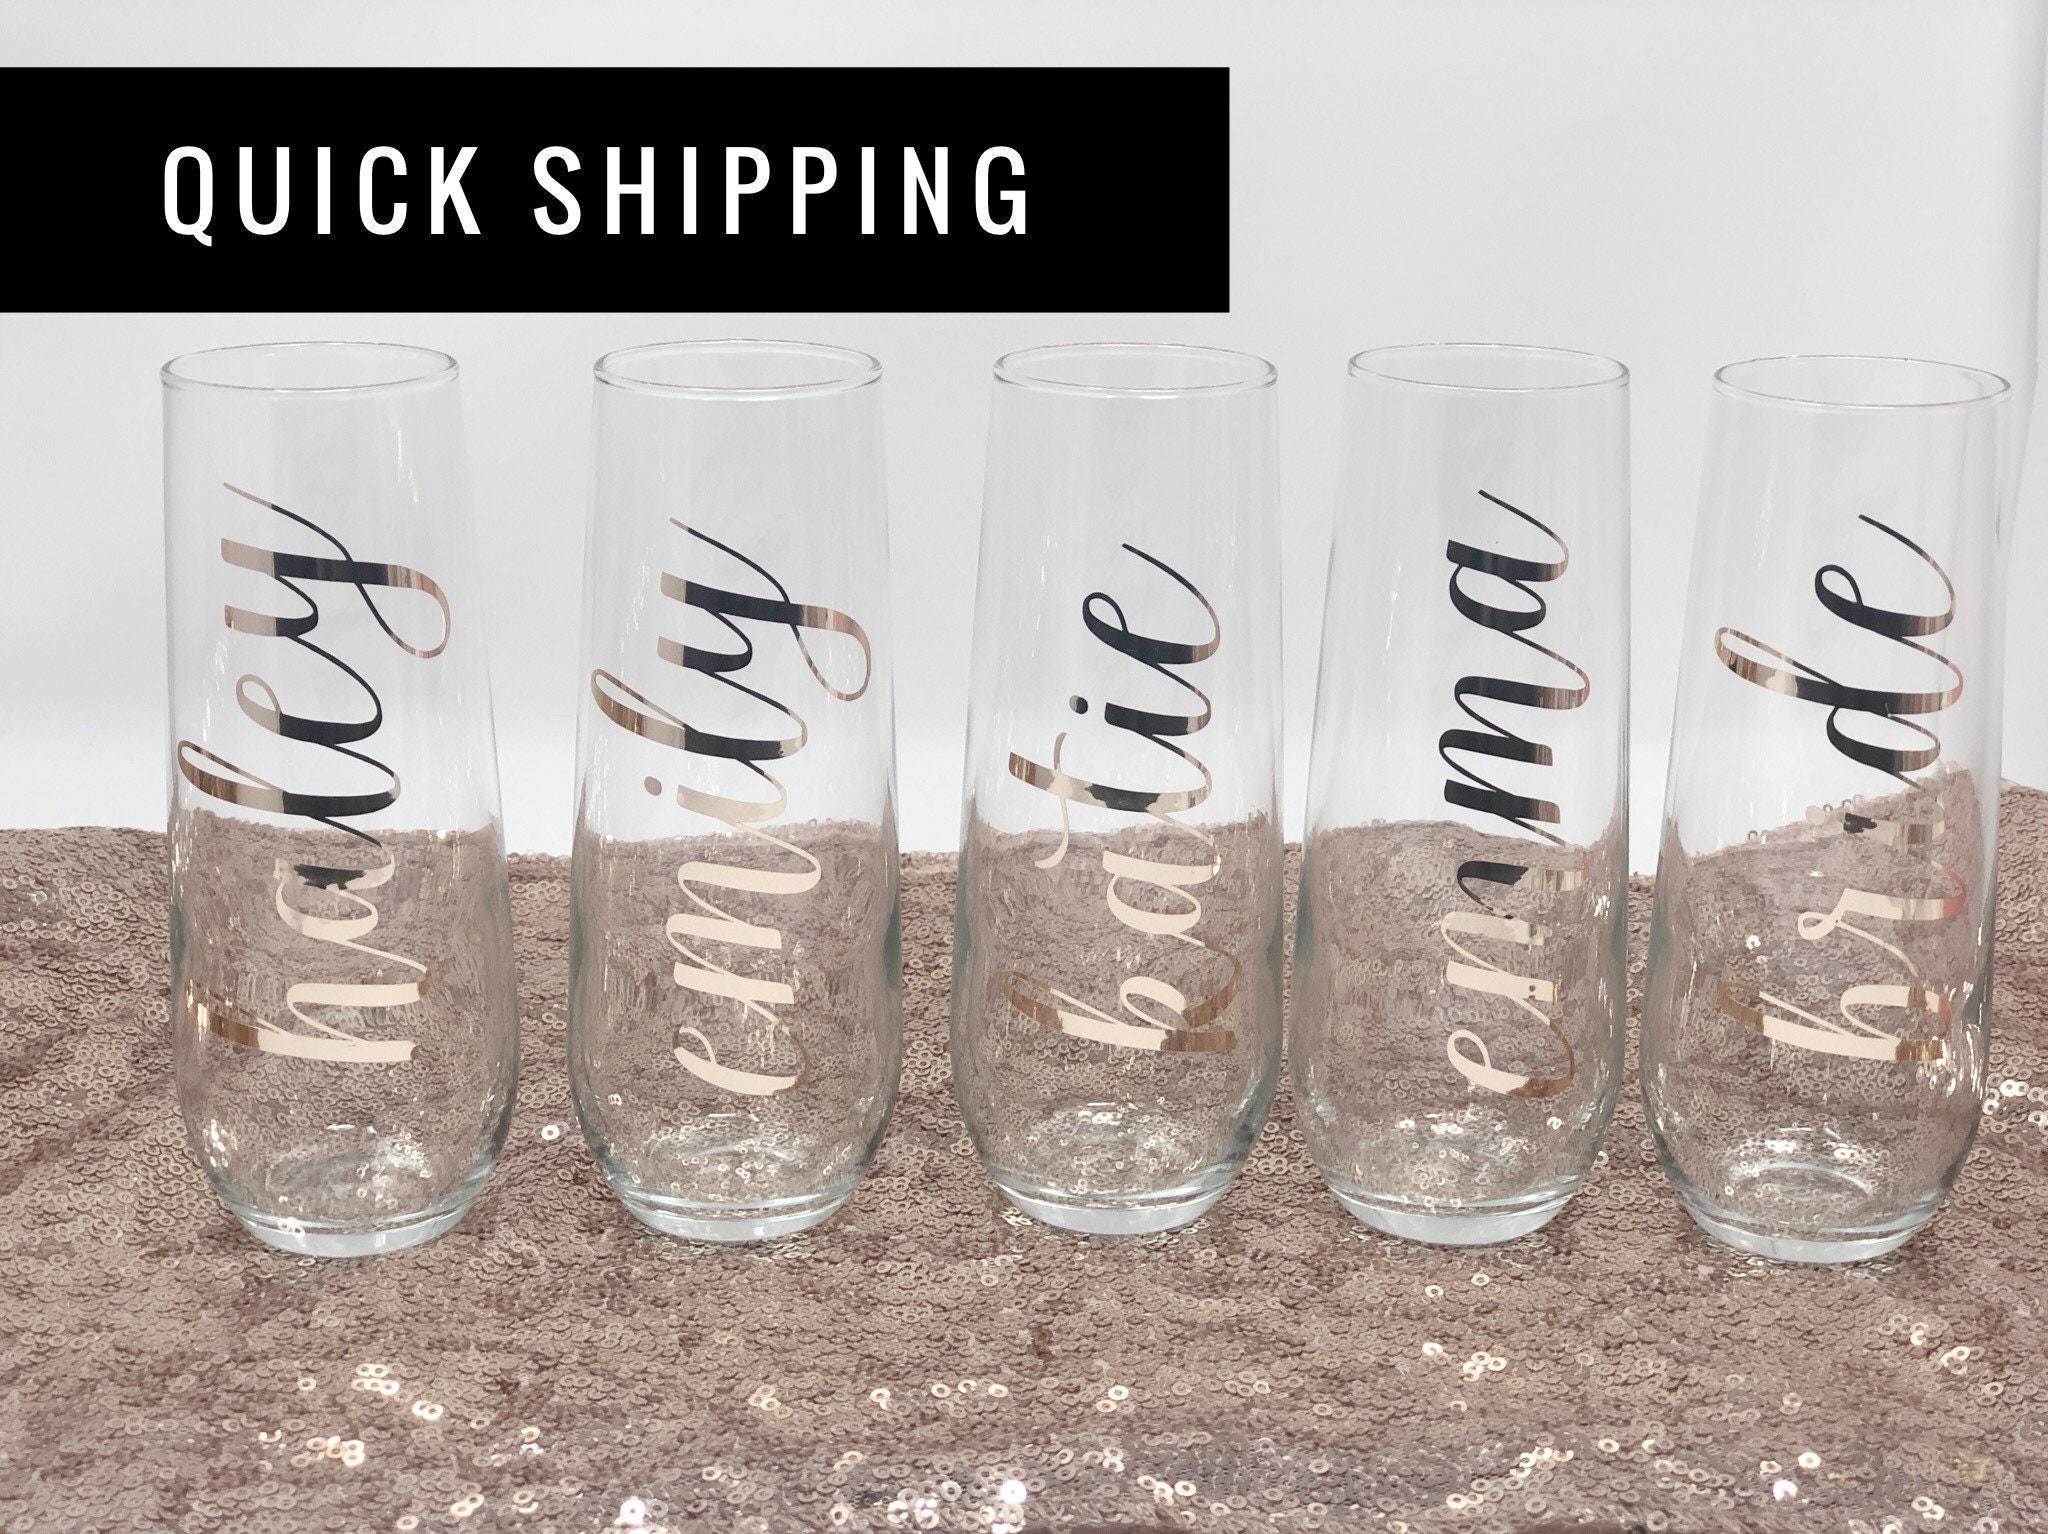 Custom Cute Quotes and Sayings Champagne Flute - Stemless Engraved